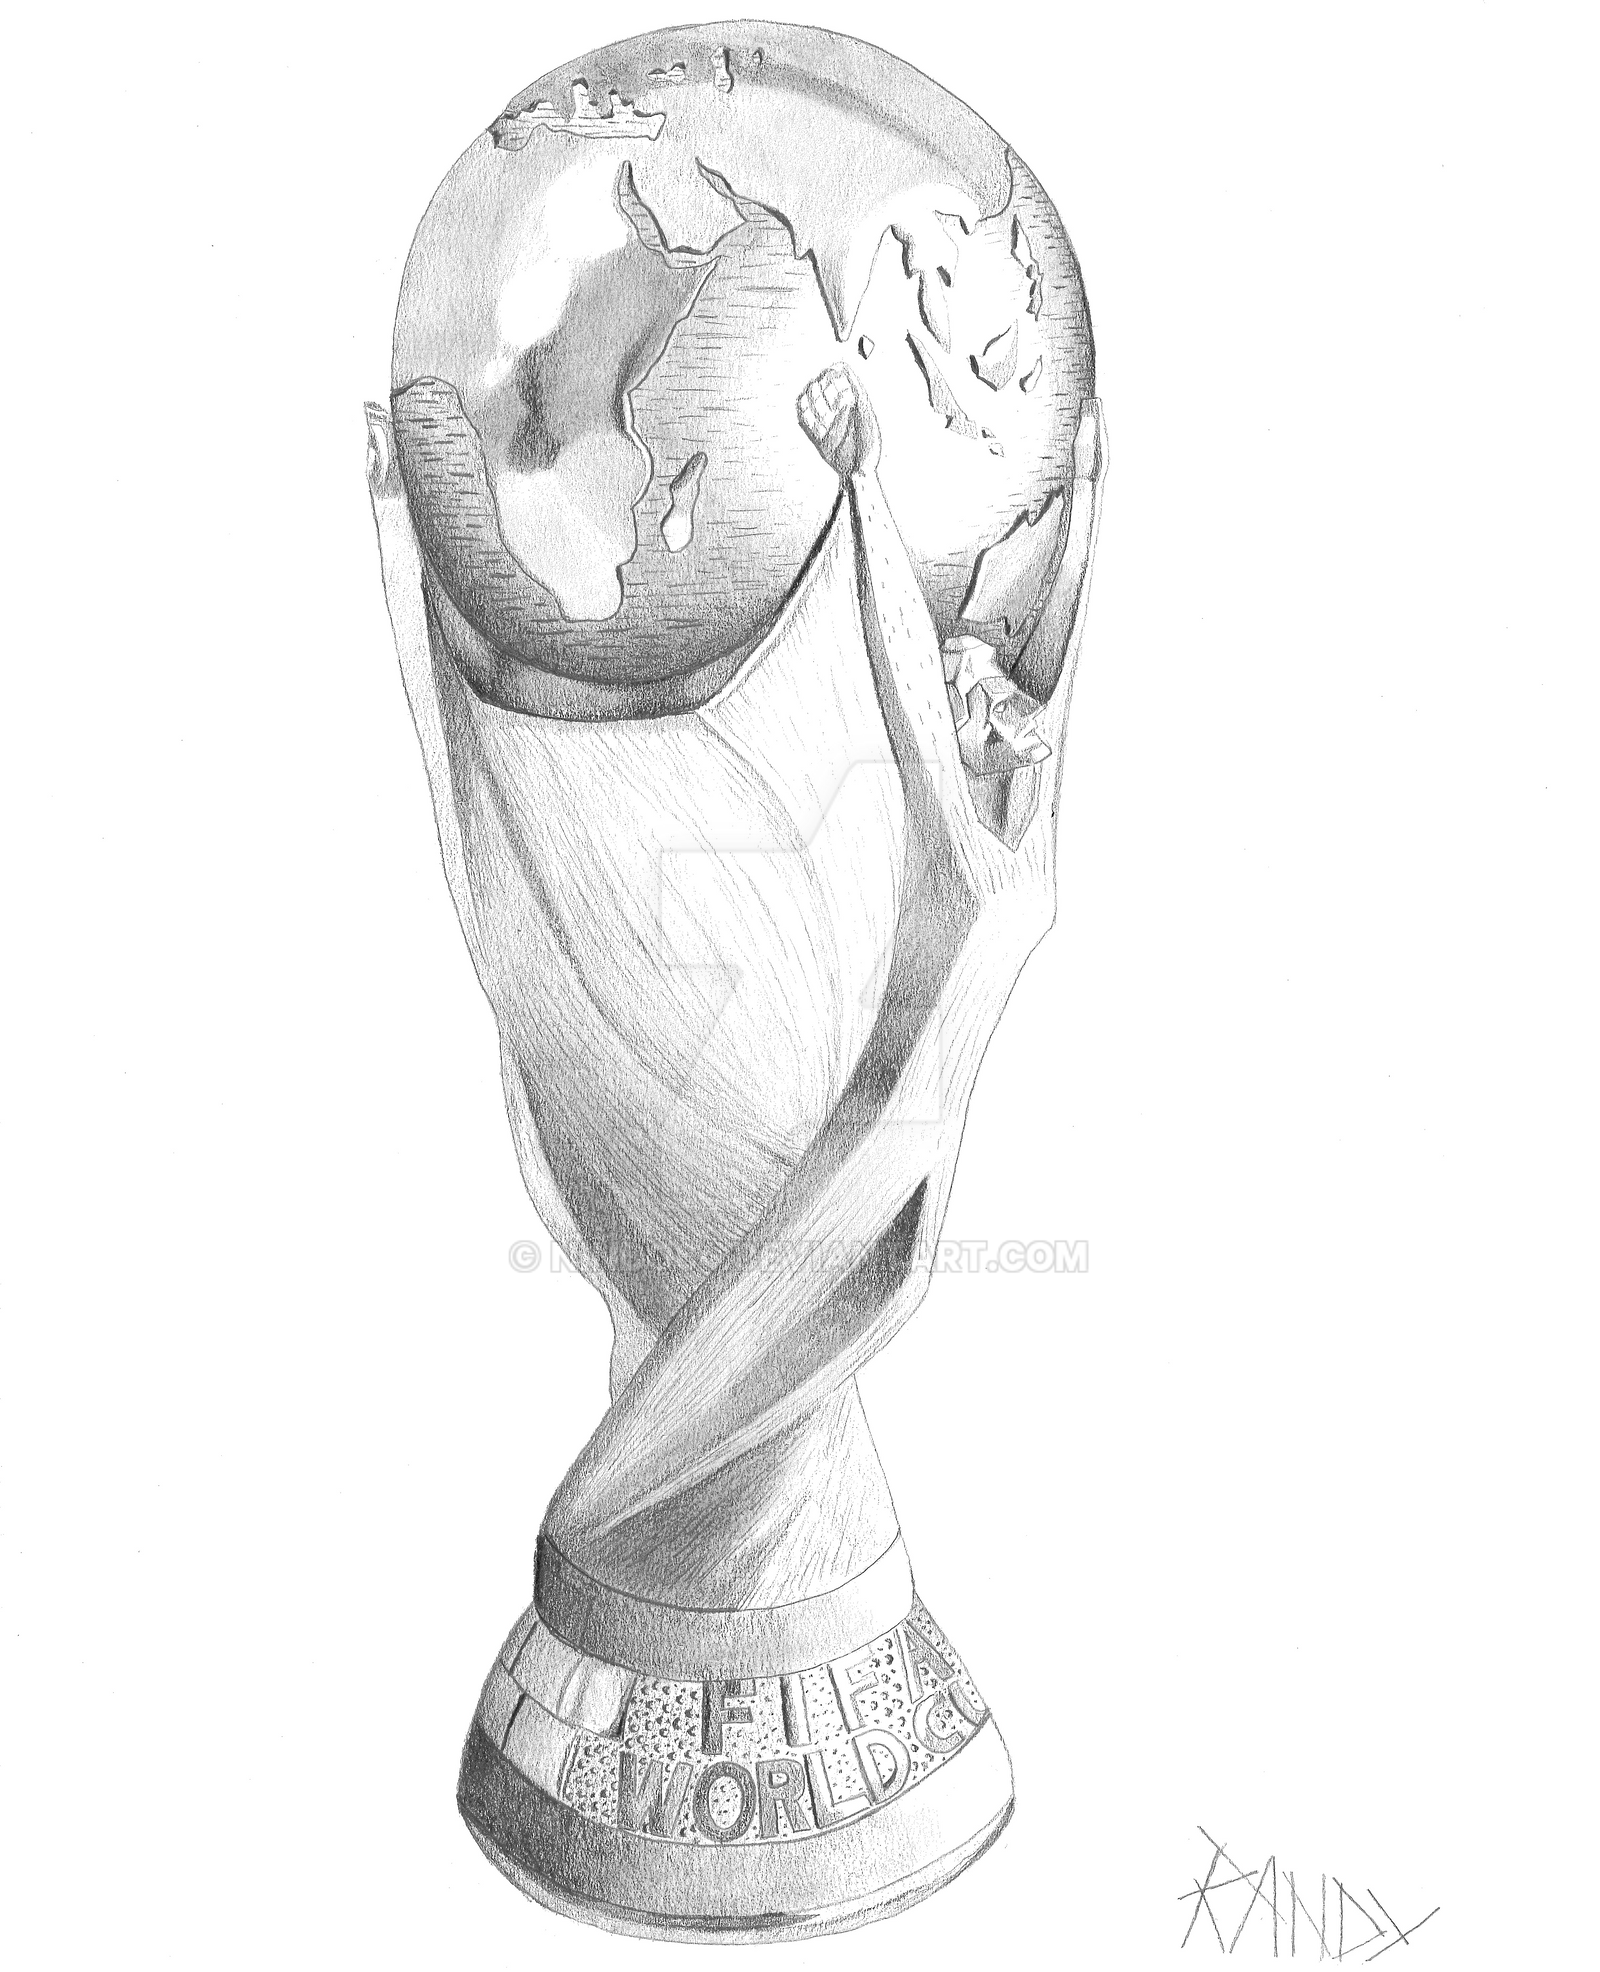 world_cup_trophy_by_nindo64-dchdt6s.png